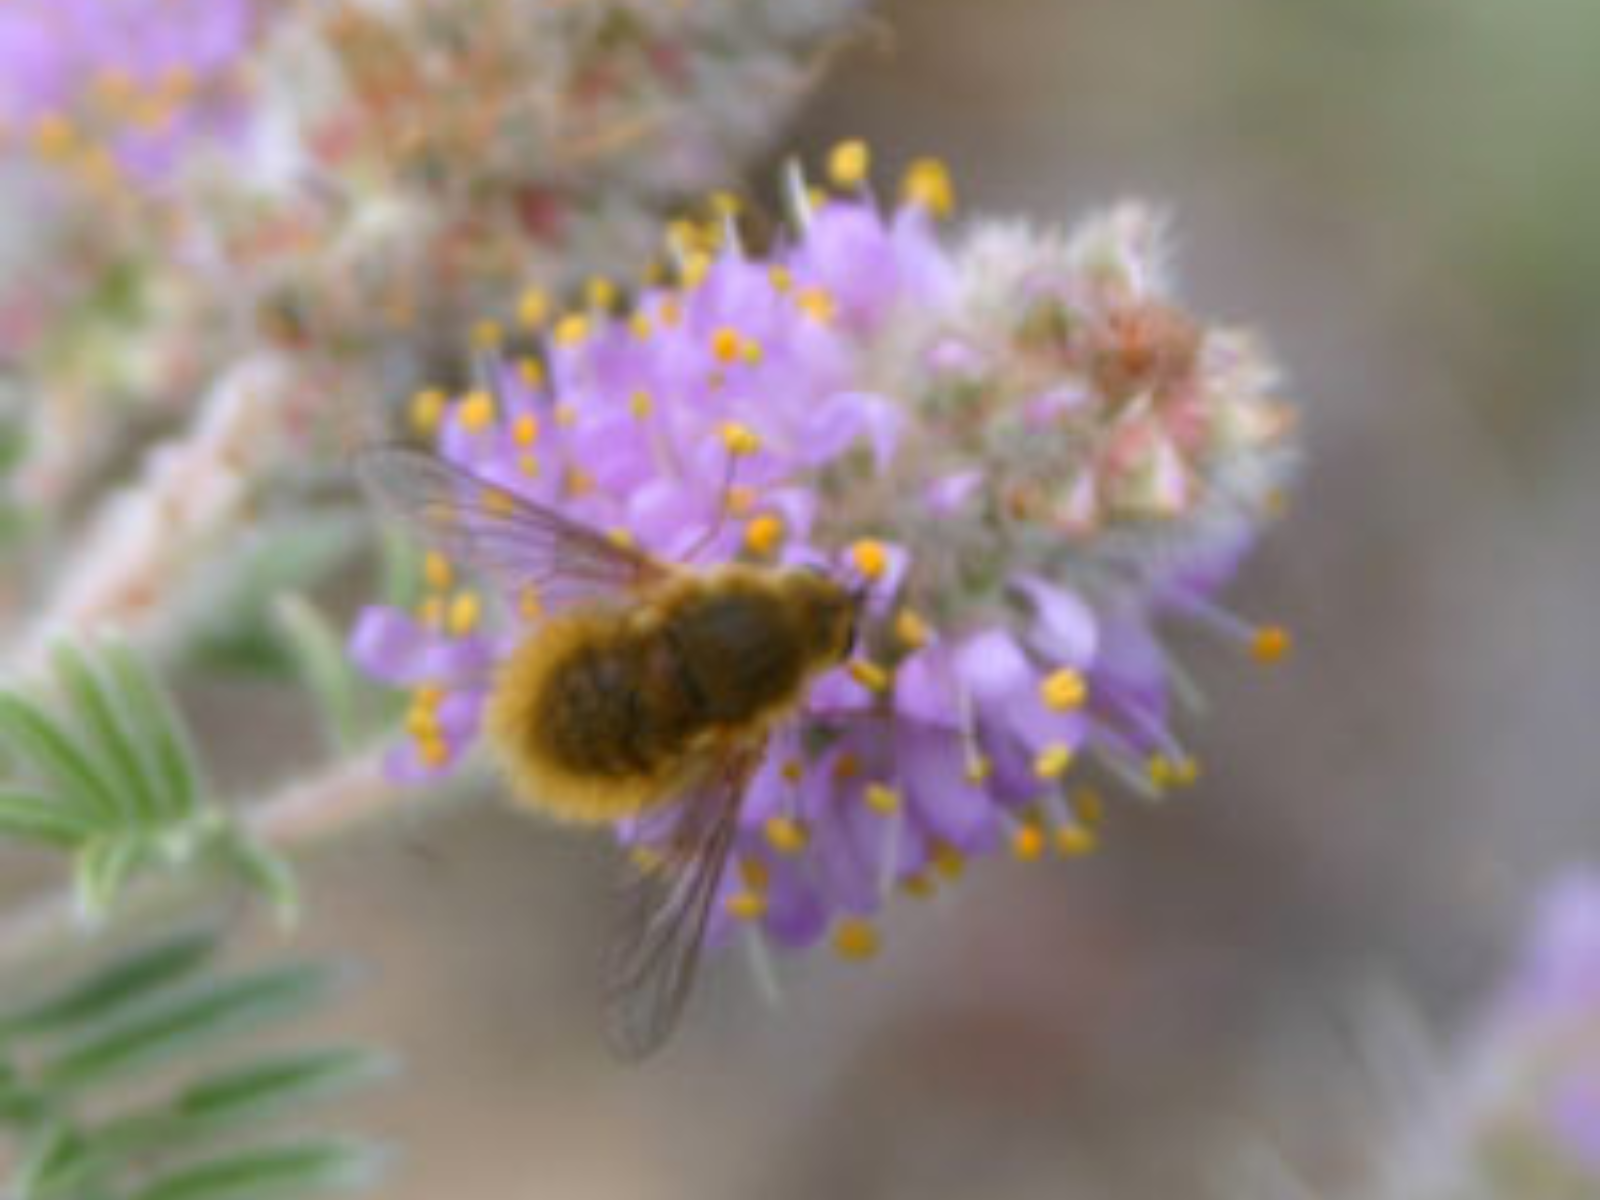 A fuzzy light-brown bee fly on a fluffy purple flower.